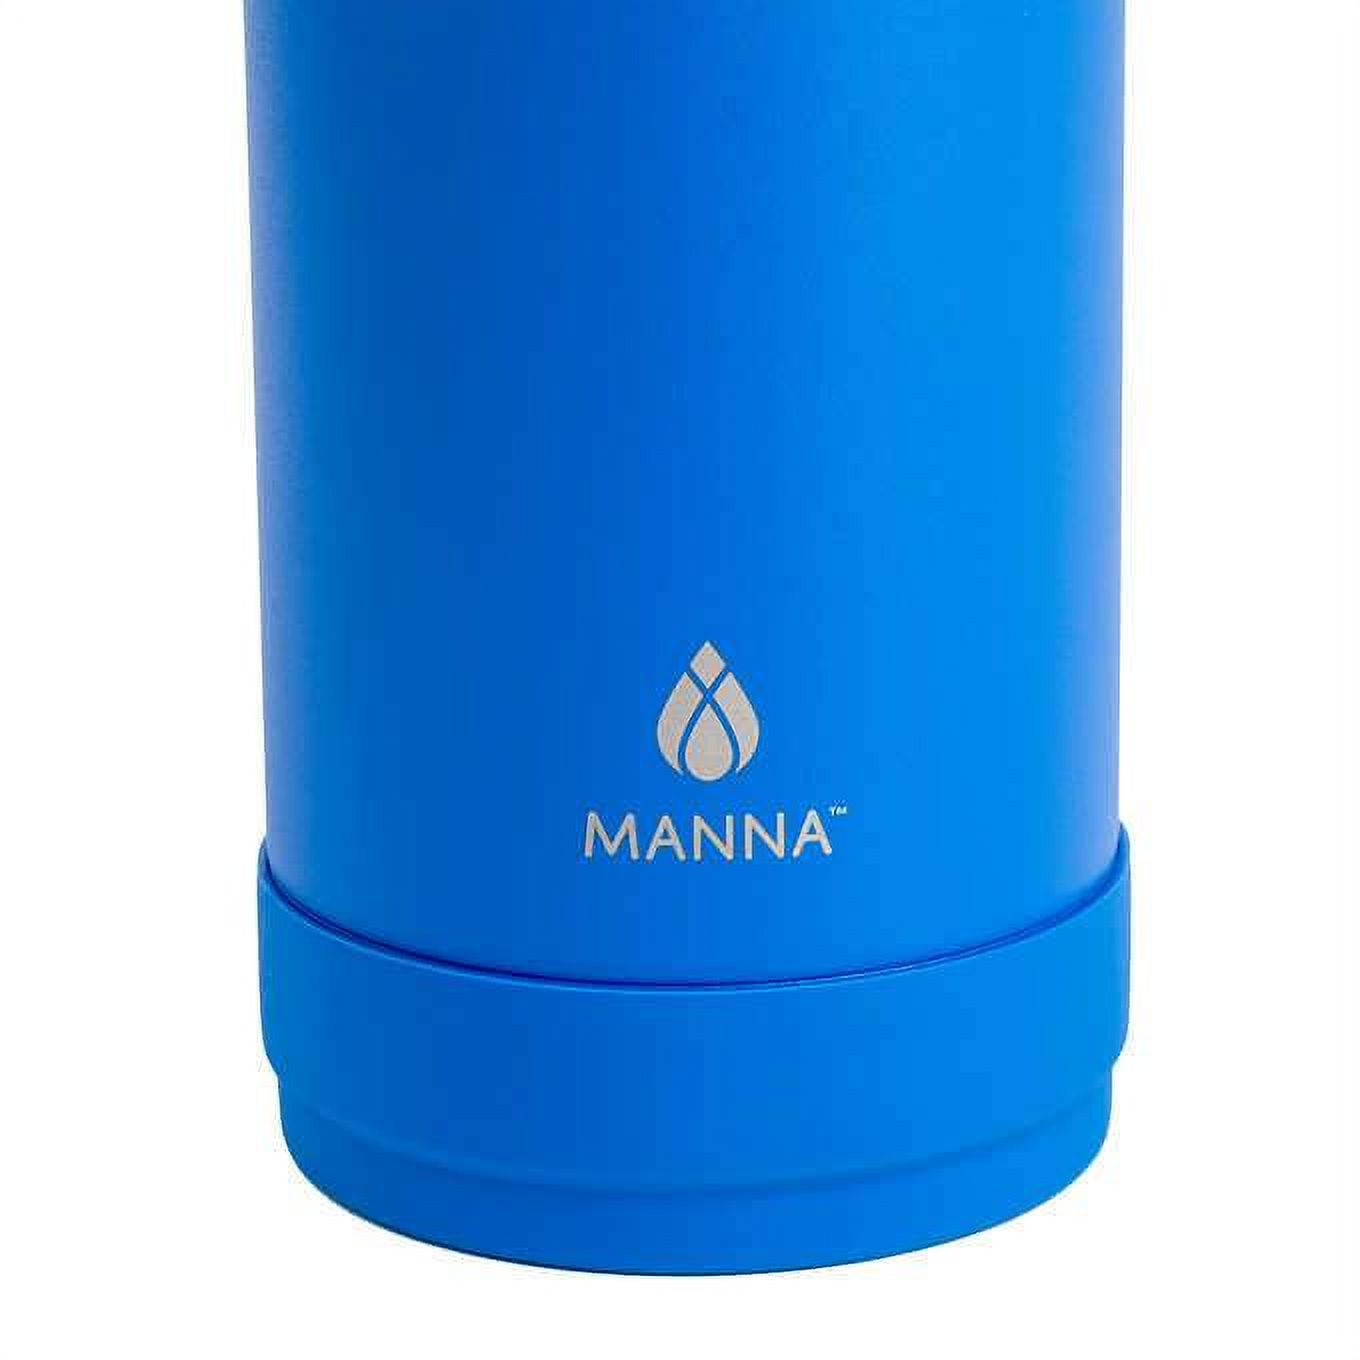 Manna Stainless Steel Convoy 32oz Water Bottle, 2-pack - image 5 of 11